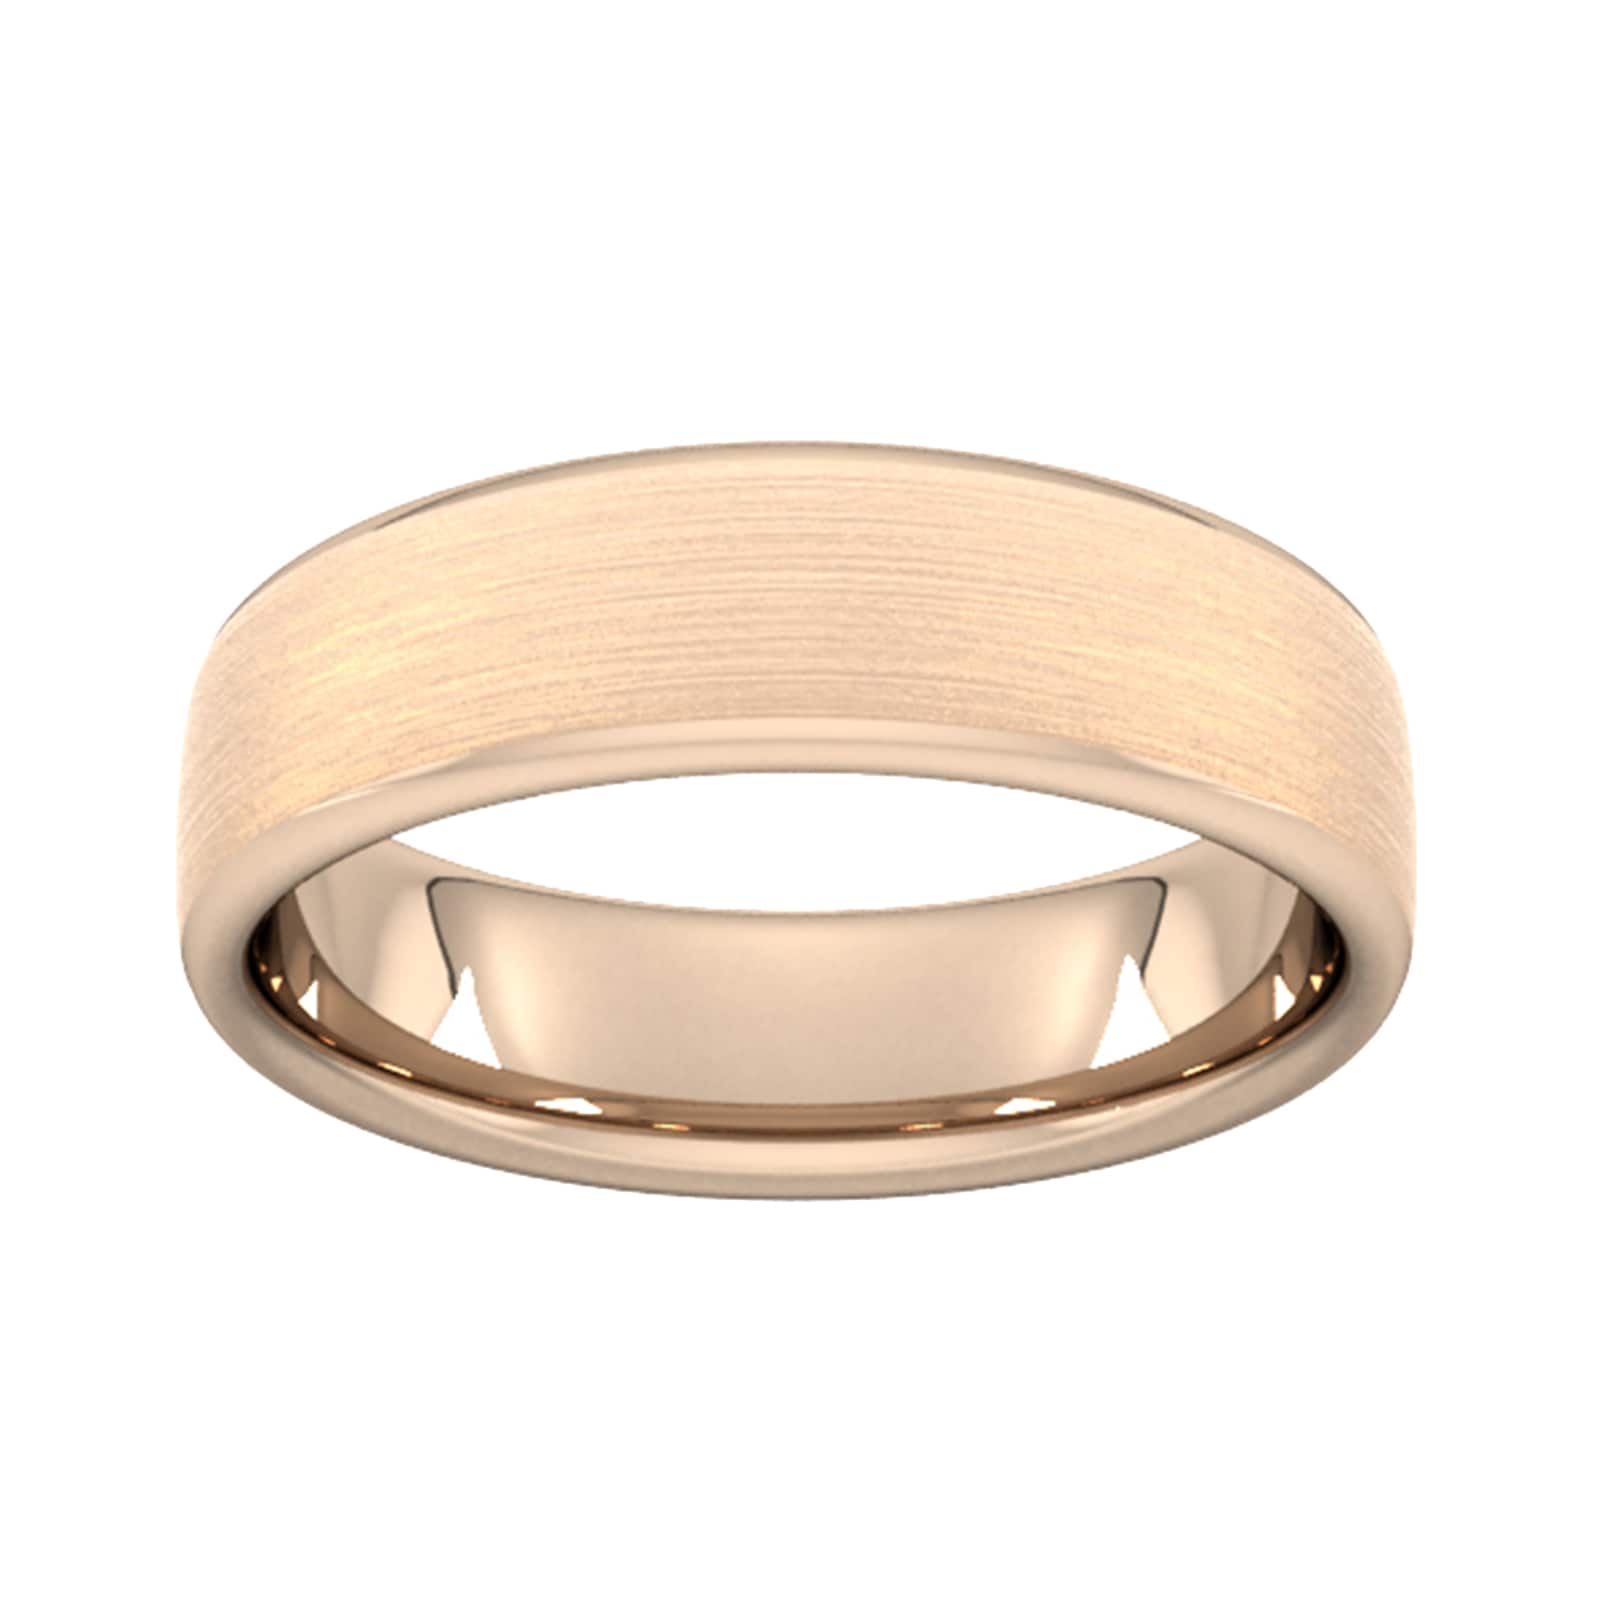 6mm D Shape Heavy Matt Finished Wedding Ring In 18 Carat Rose Gold - Ring Size R